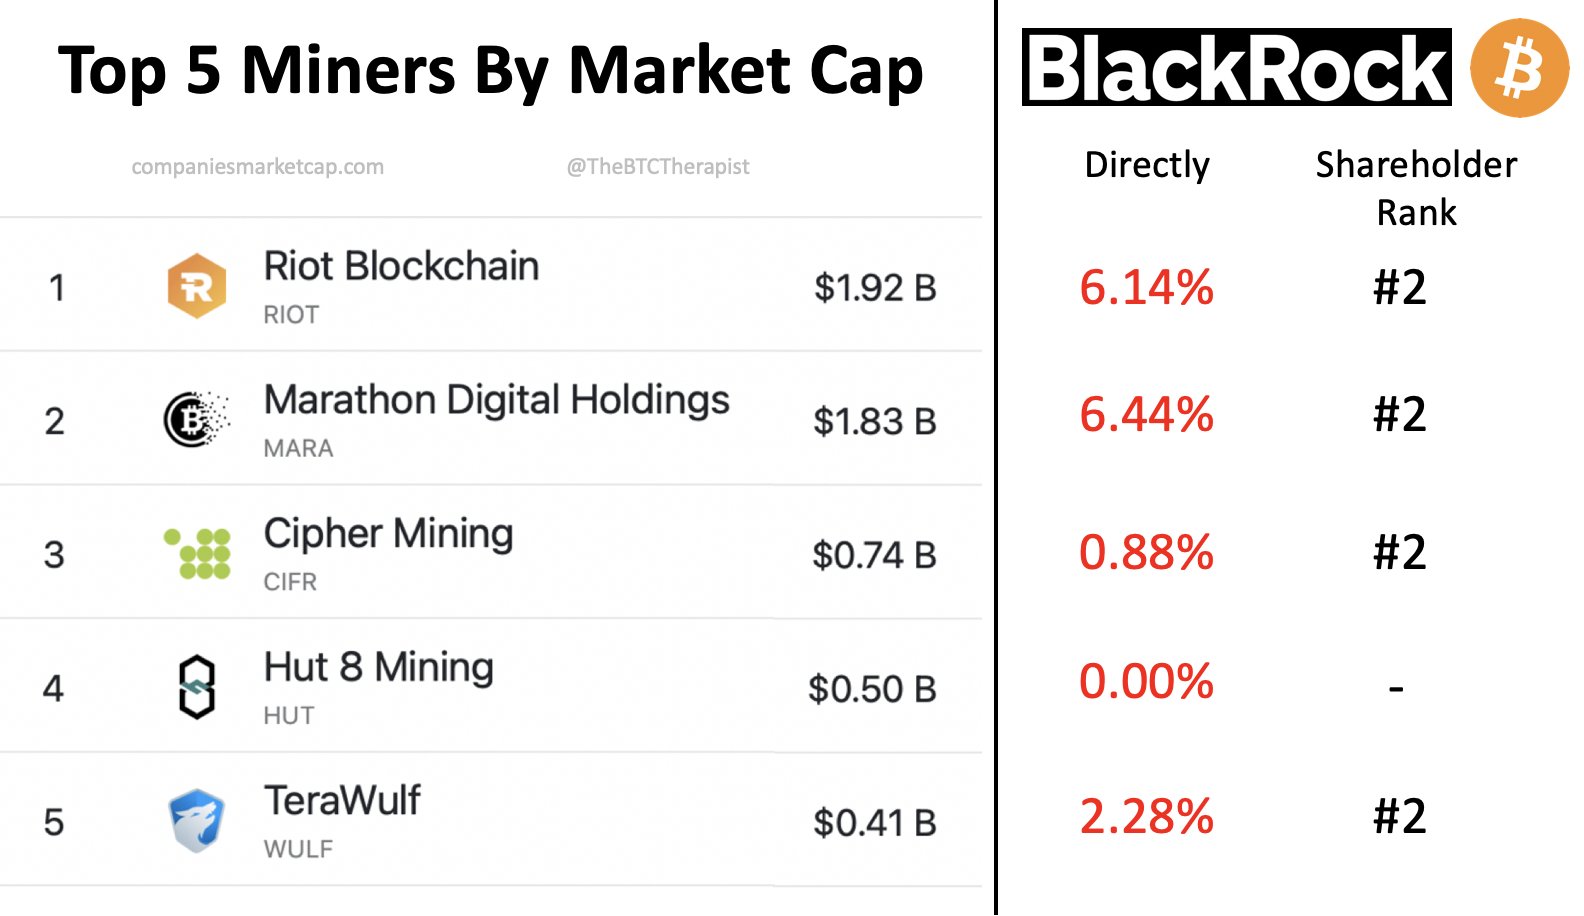 BlackRock shareholding in top Bitcoin miners